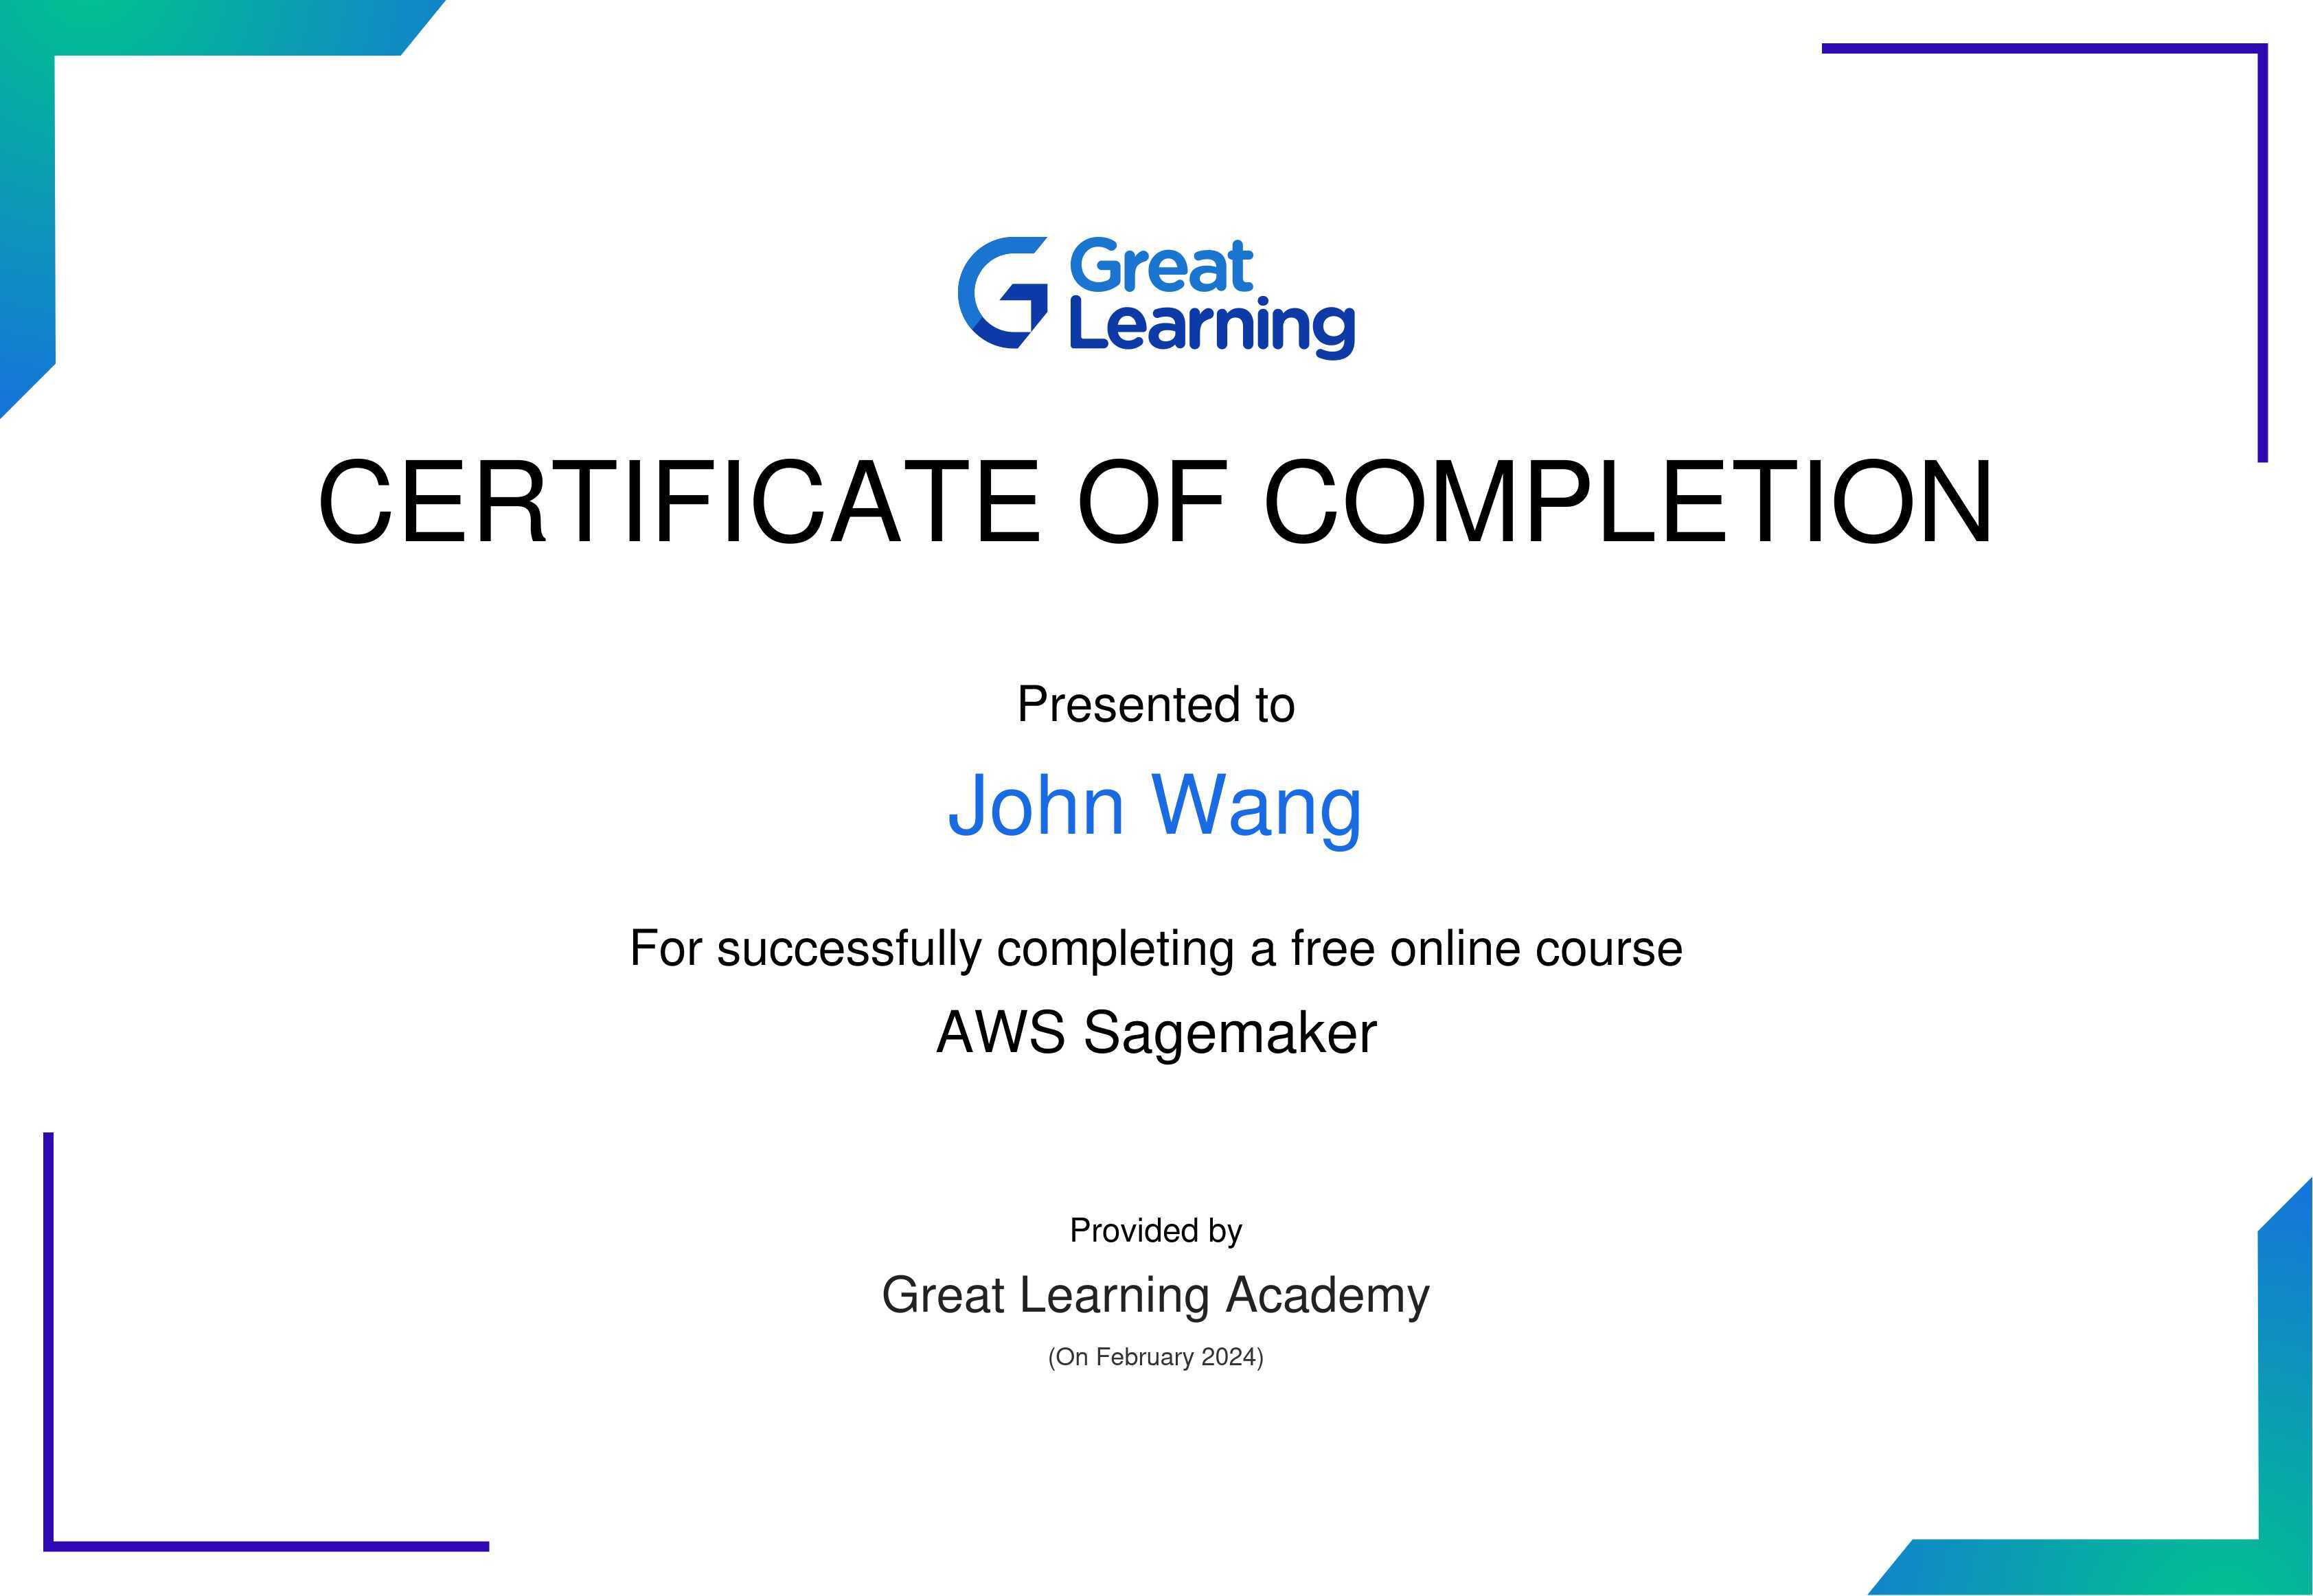 John's AWS SageMaker from Great Learning Academy by Vishal Padghan